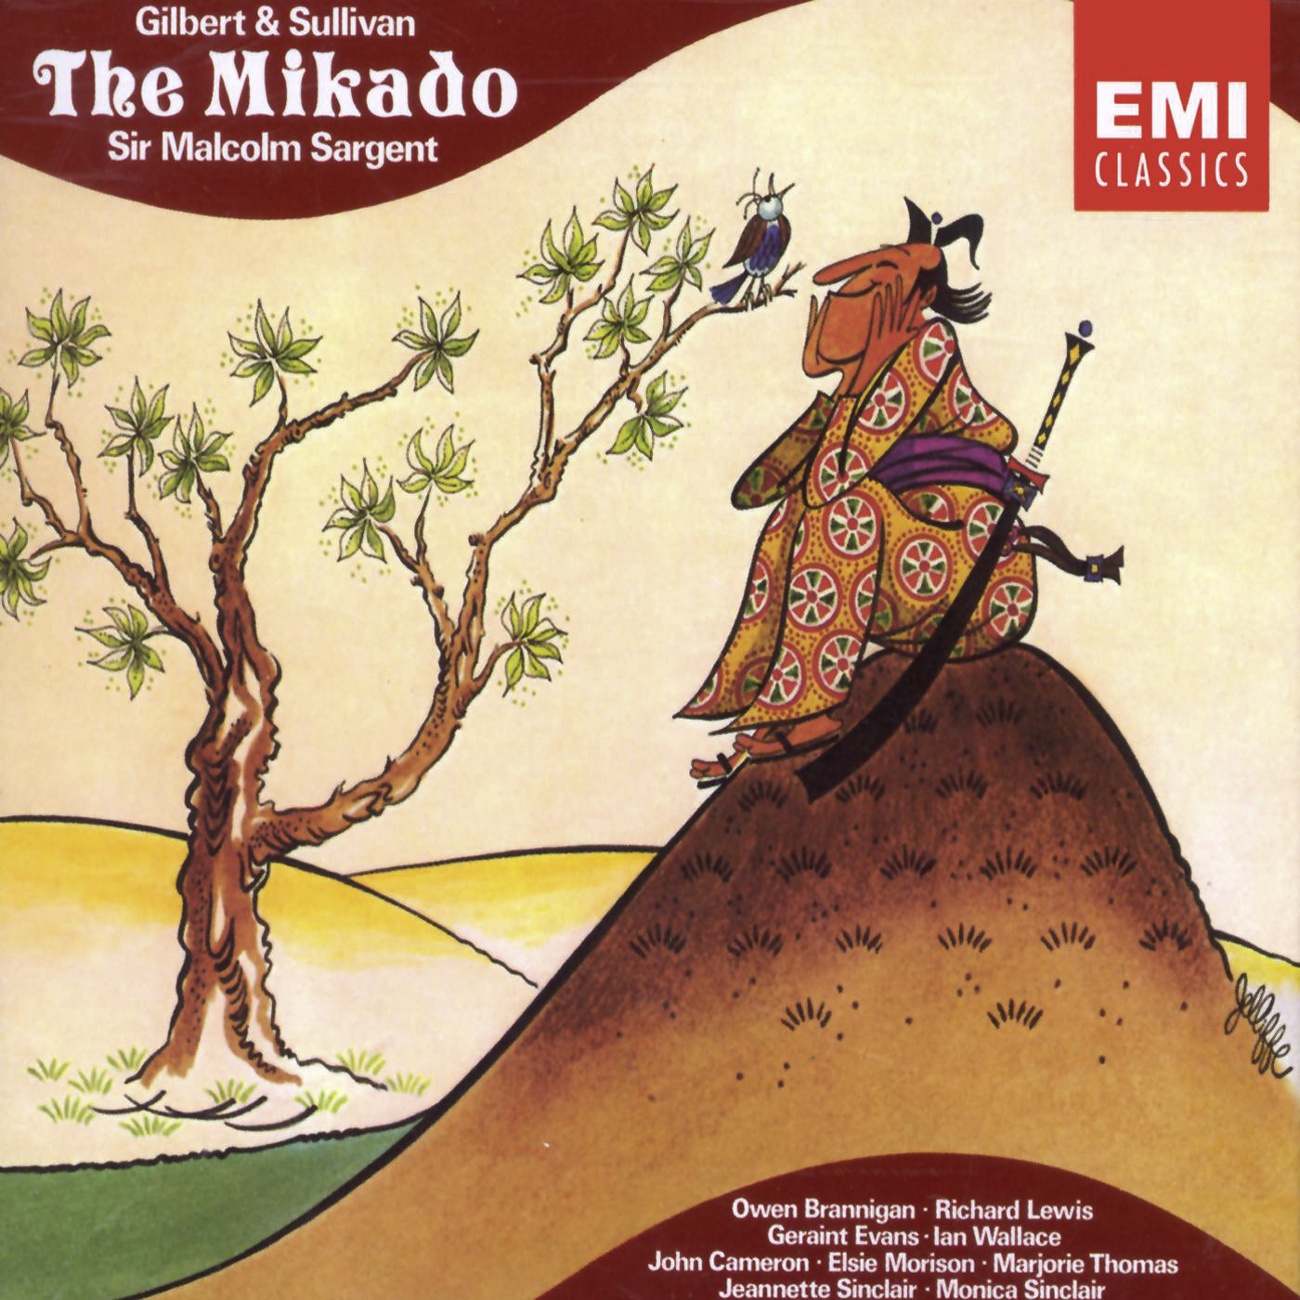 The Mikado (or, The Town of Titipu), Act I: Three little maids from school (Yum-Yum, Peep-Bo, Pitti-Sing, Girls)